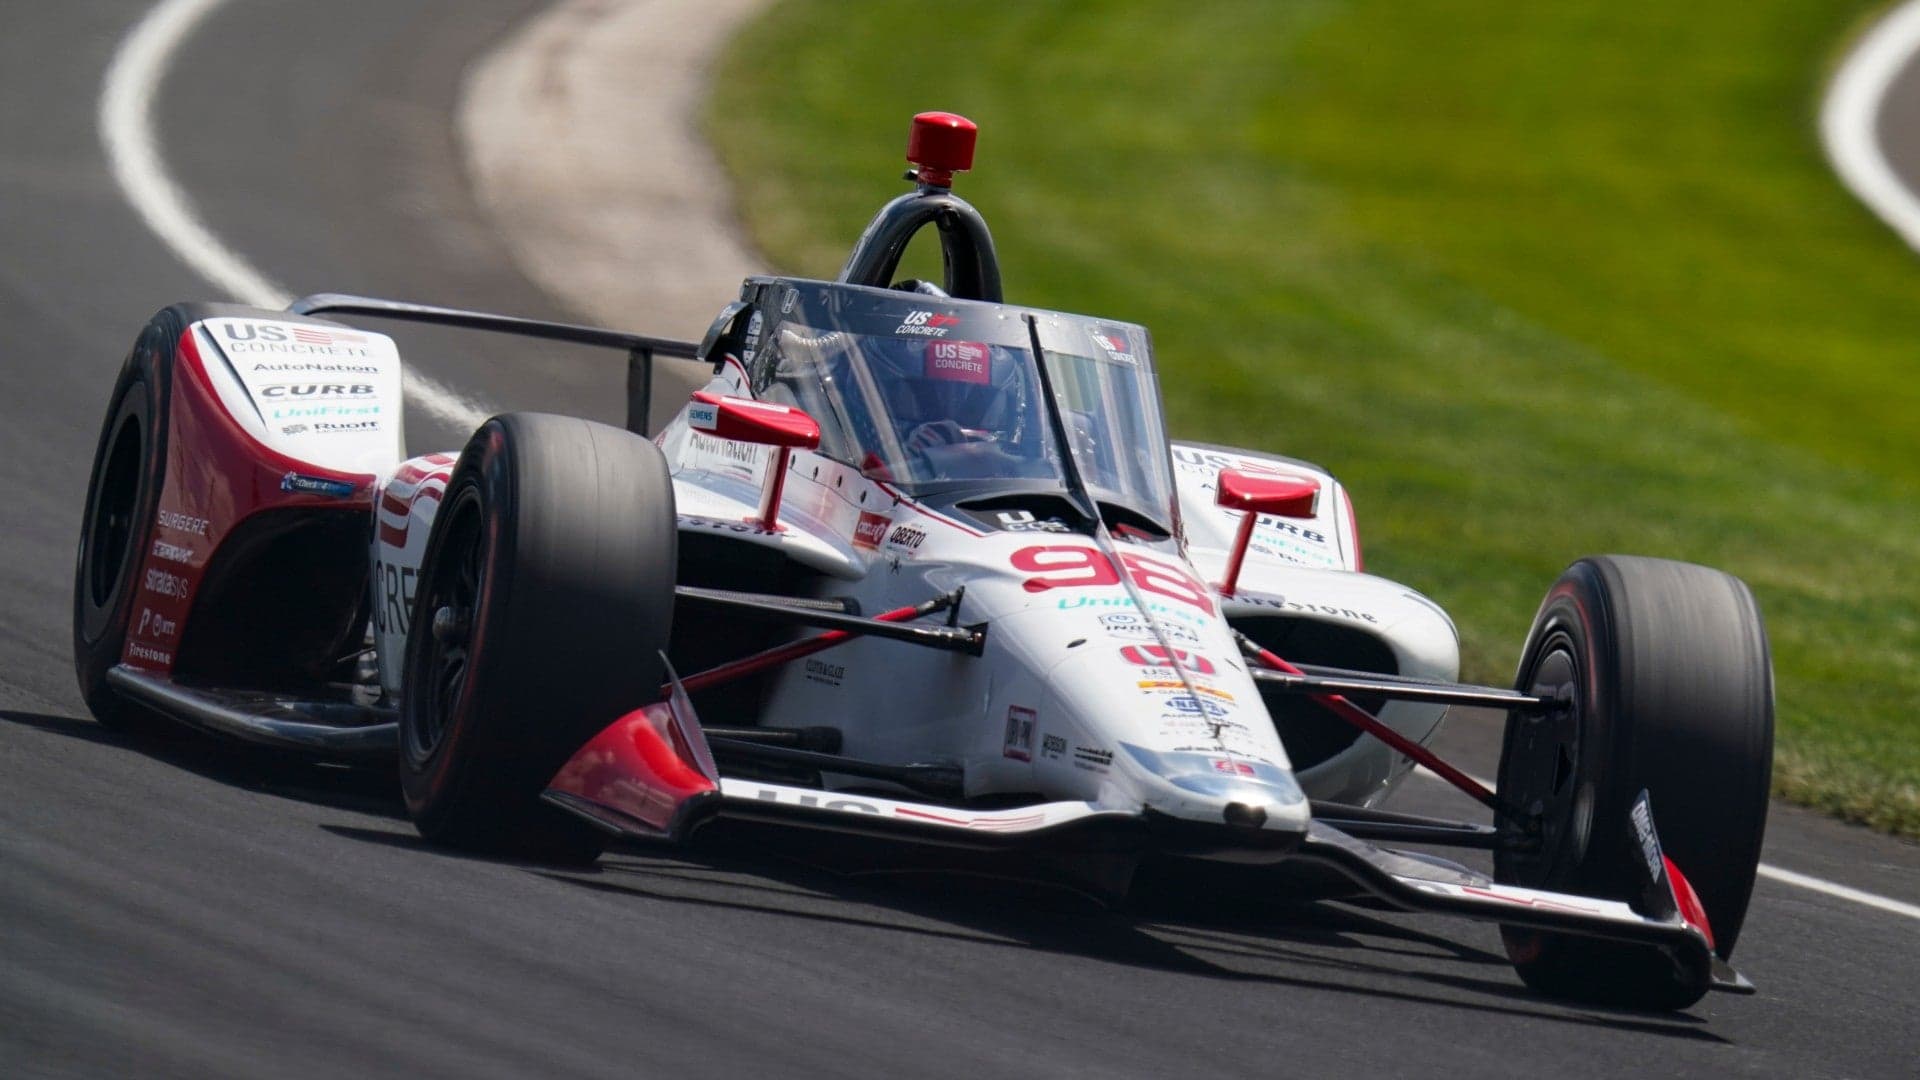 Marco Andretti Explains How the Indy 500 Pole Was His to Lose